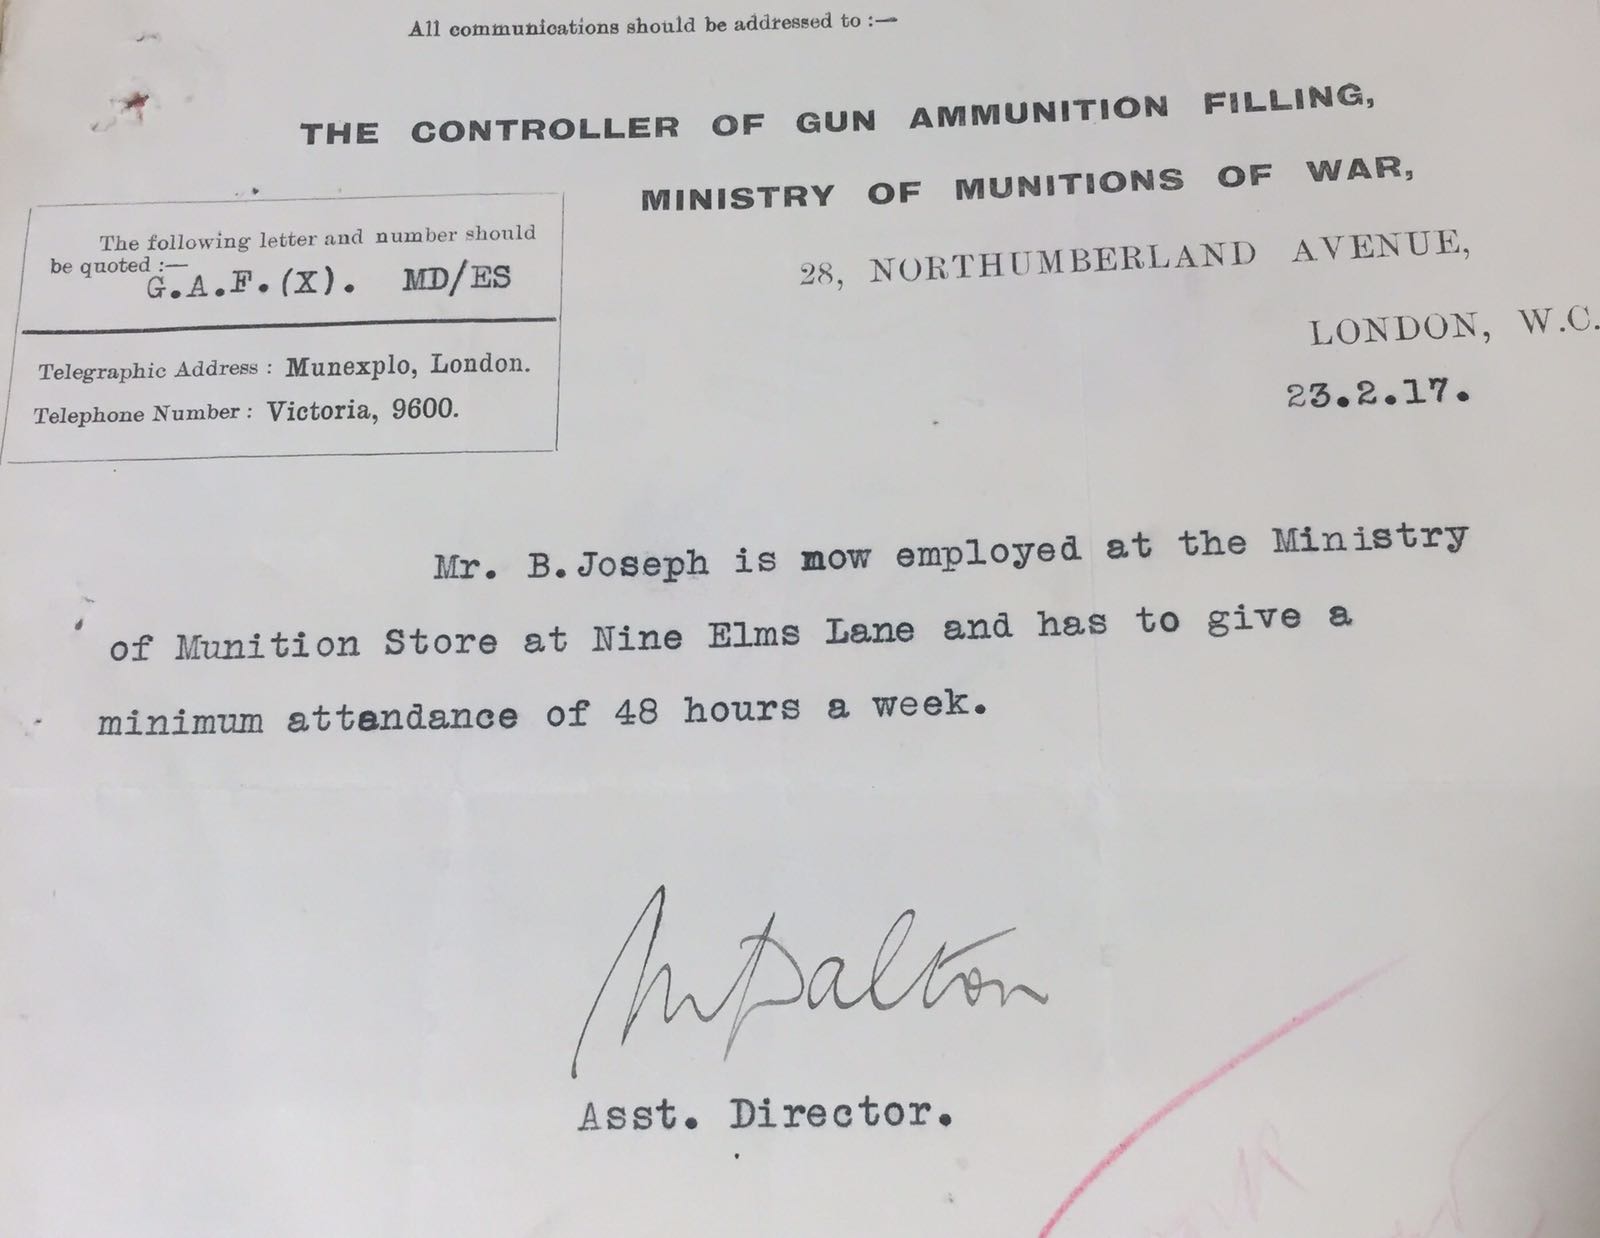 Image of confirmation of Benjamin Joseph's employment at the Ministry of Munition Store [MH 47/55/7]